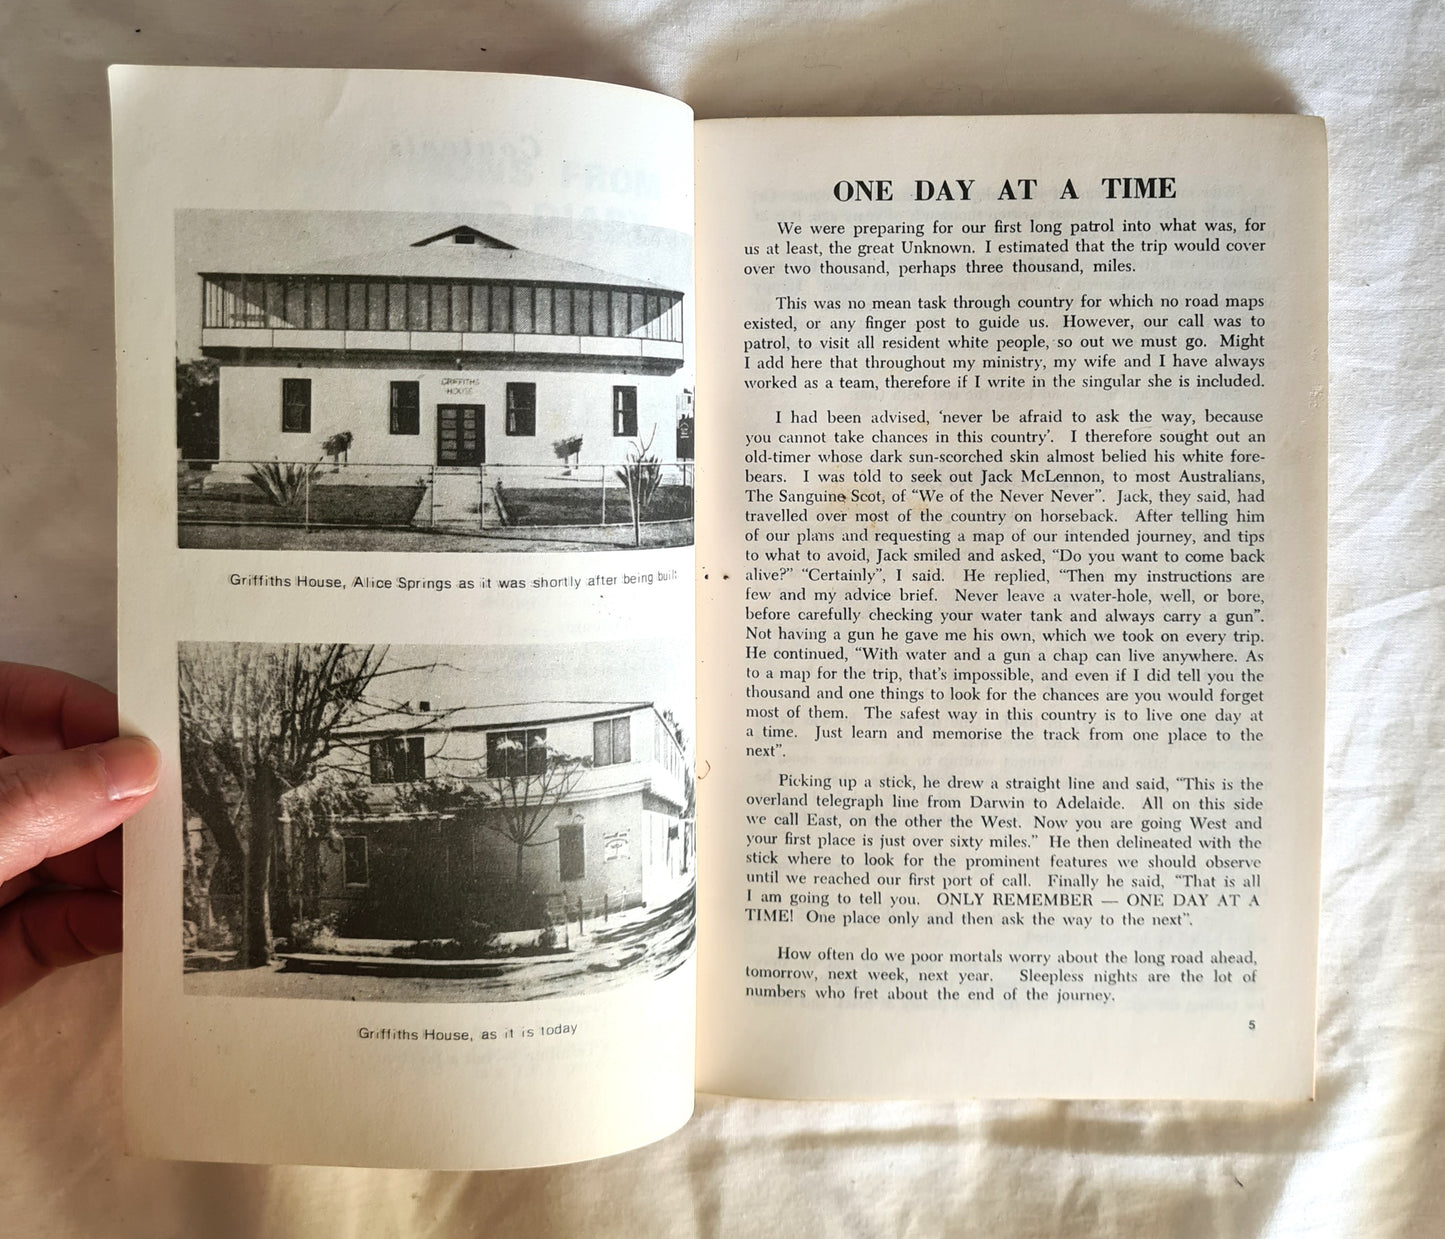 Reflections From An Inland Diary by Rev. Harry Griffiths “Griff”